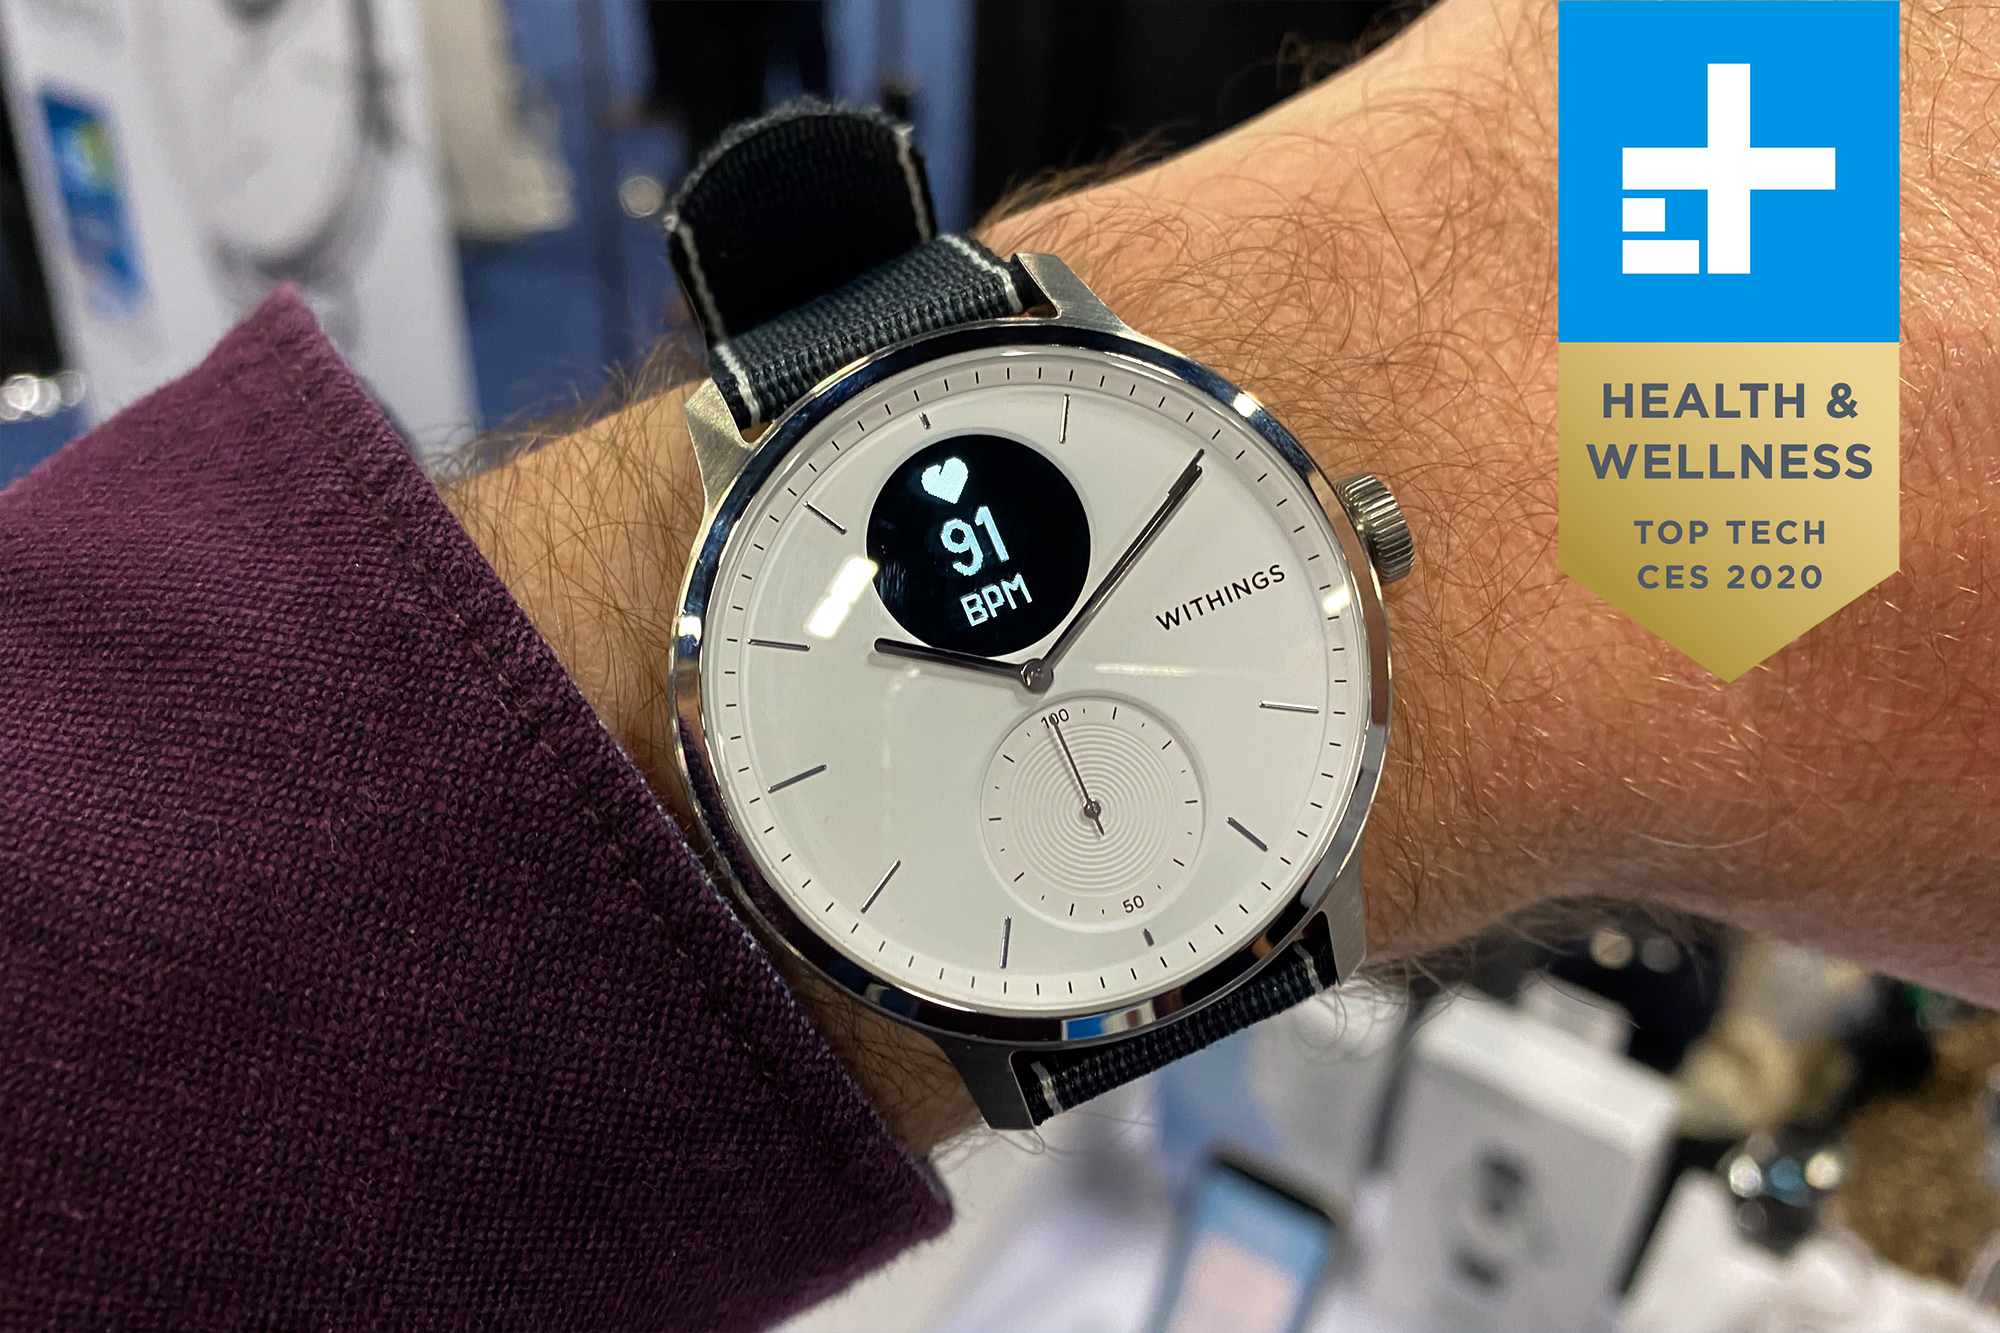 https://www.digitaltrends.com/wp-content/uploads/2020/01/best-of-ces-2020-withings-scanwatch.jpg?fit=720%2C479&p=1